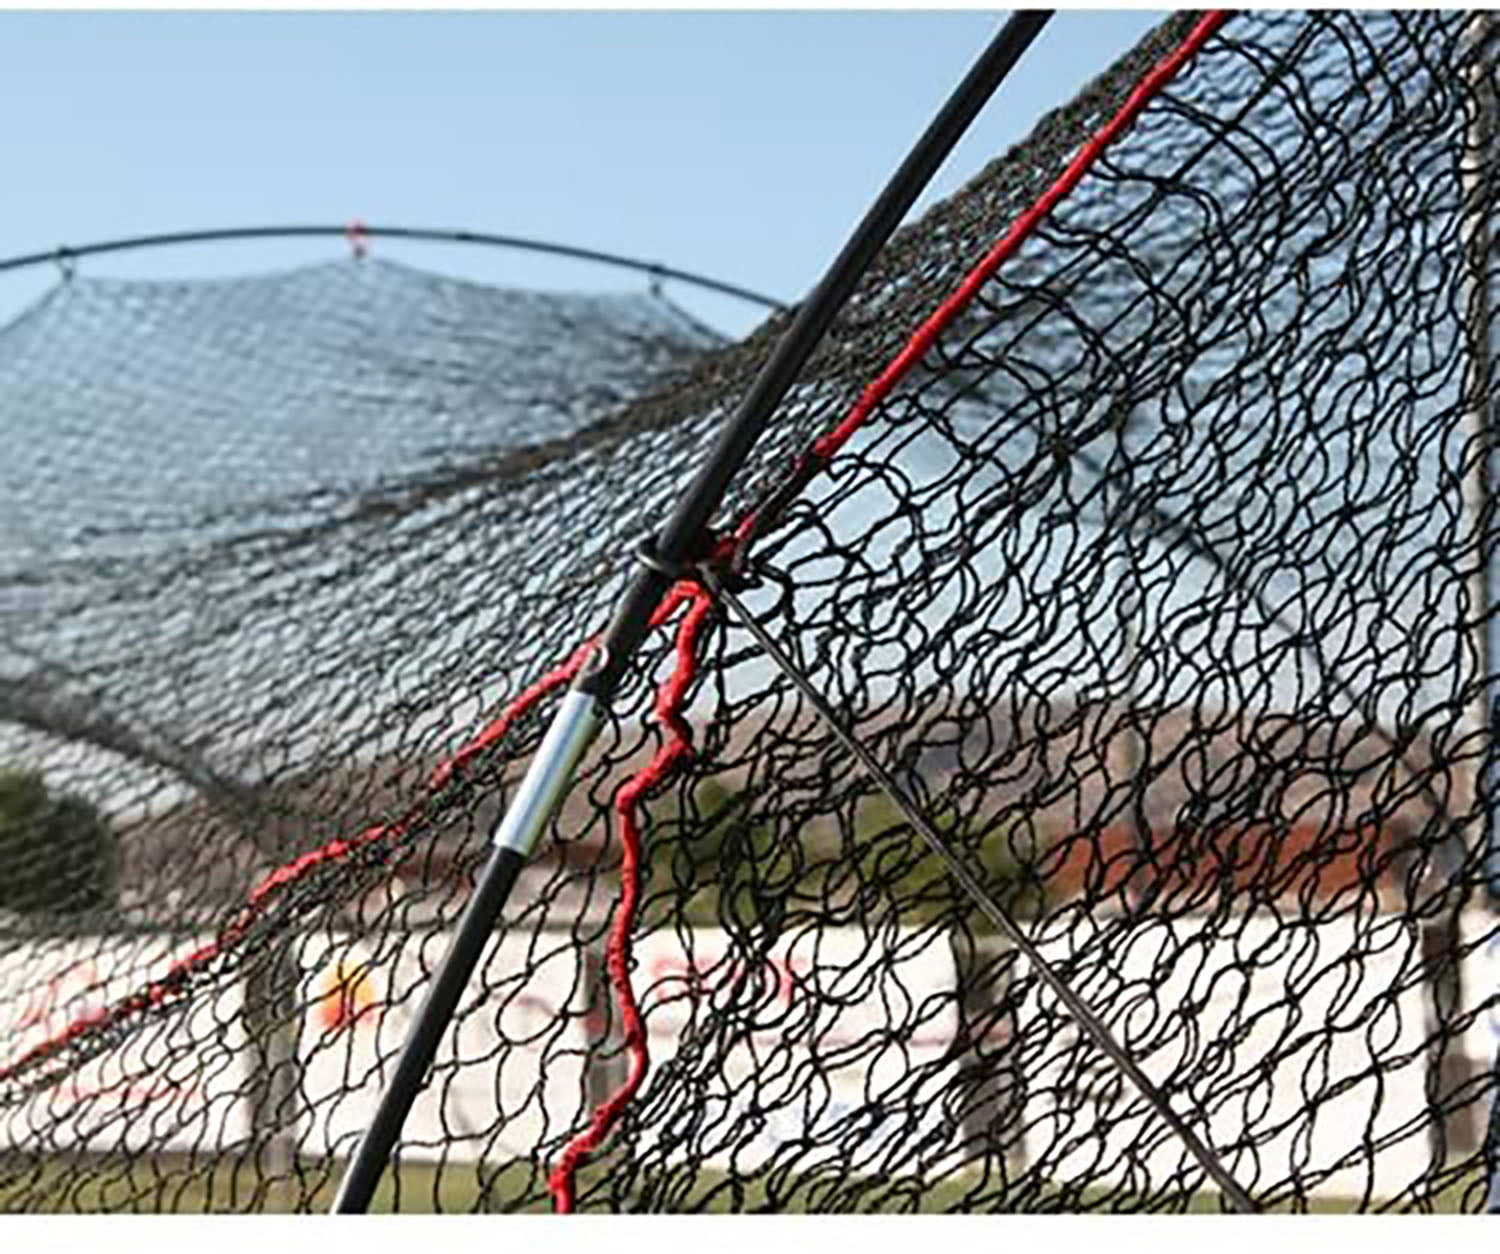 Heater Sports Xtender 30' Baseball and Softball Batting Cage Net and Frame - Pro-Distributing